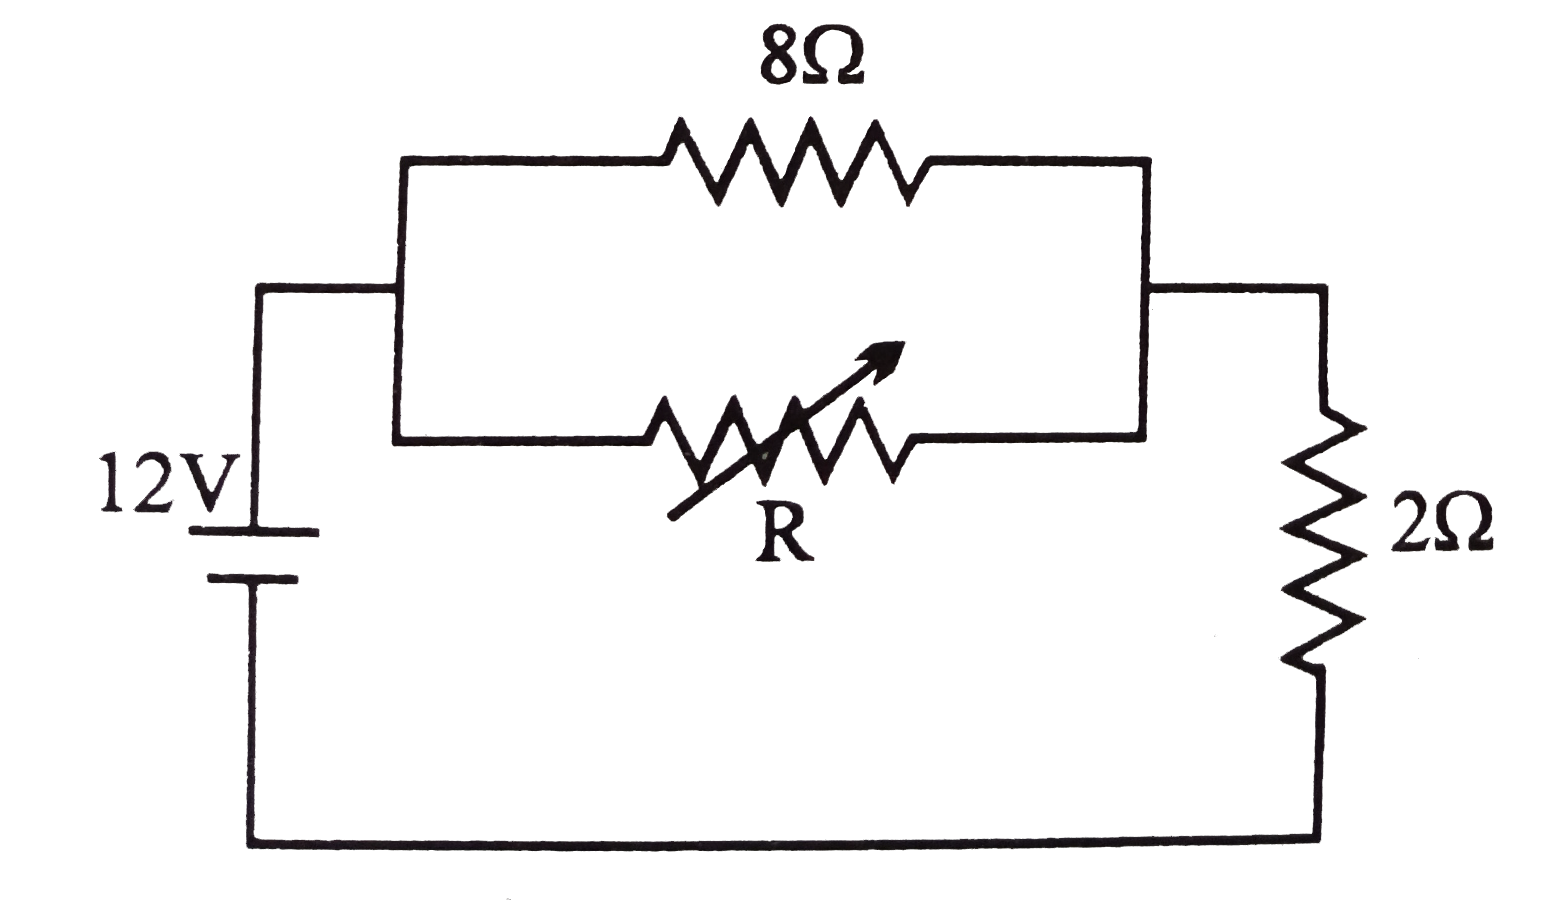 The value of the resistance R in figure is adjusted such that power dissipated in the 2Omega resistor is maximum. Under this condition